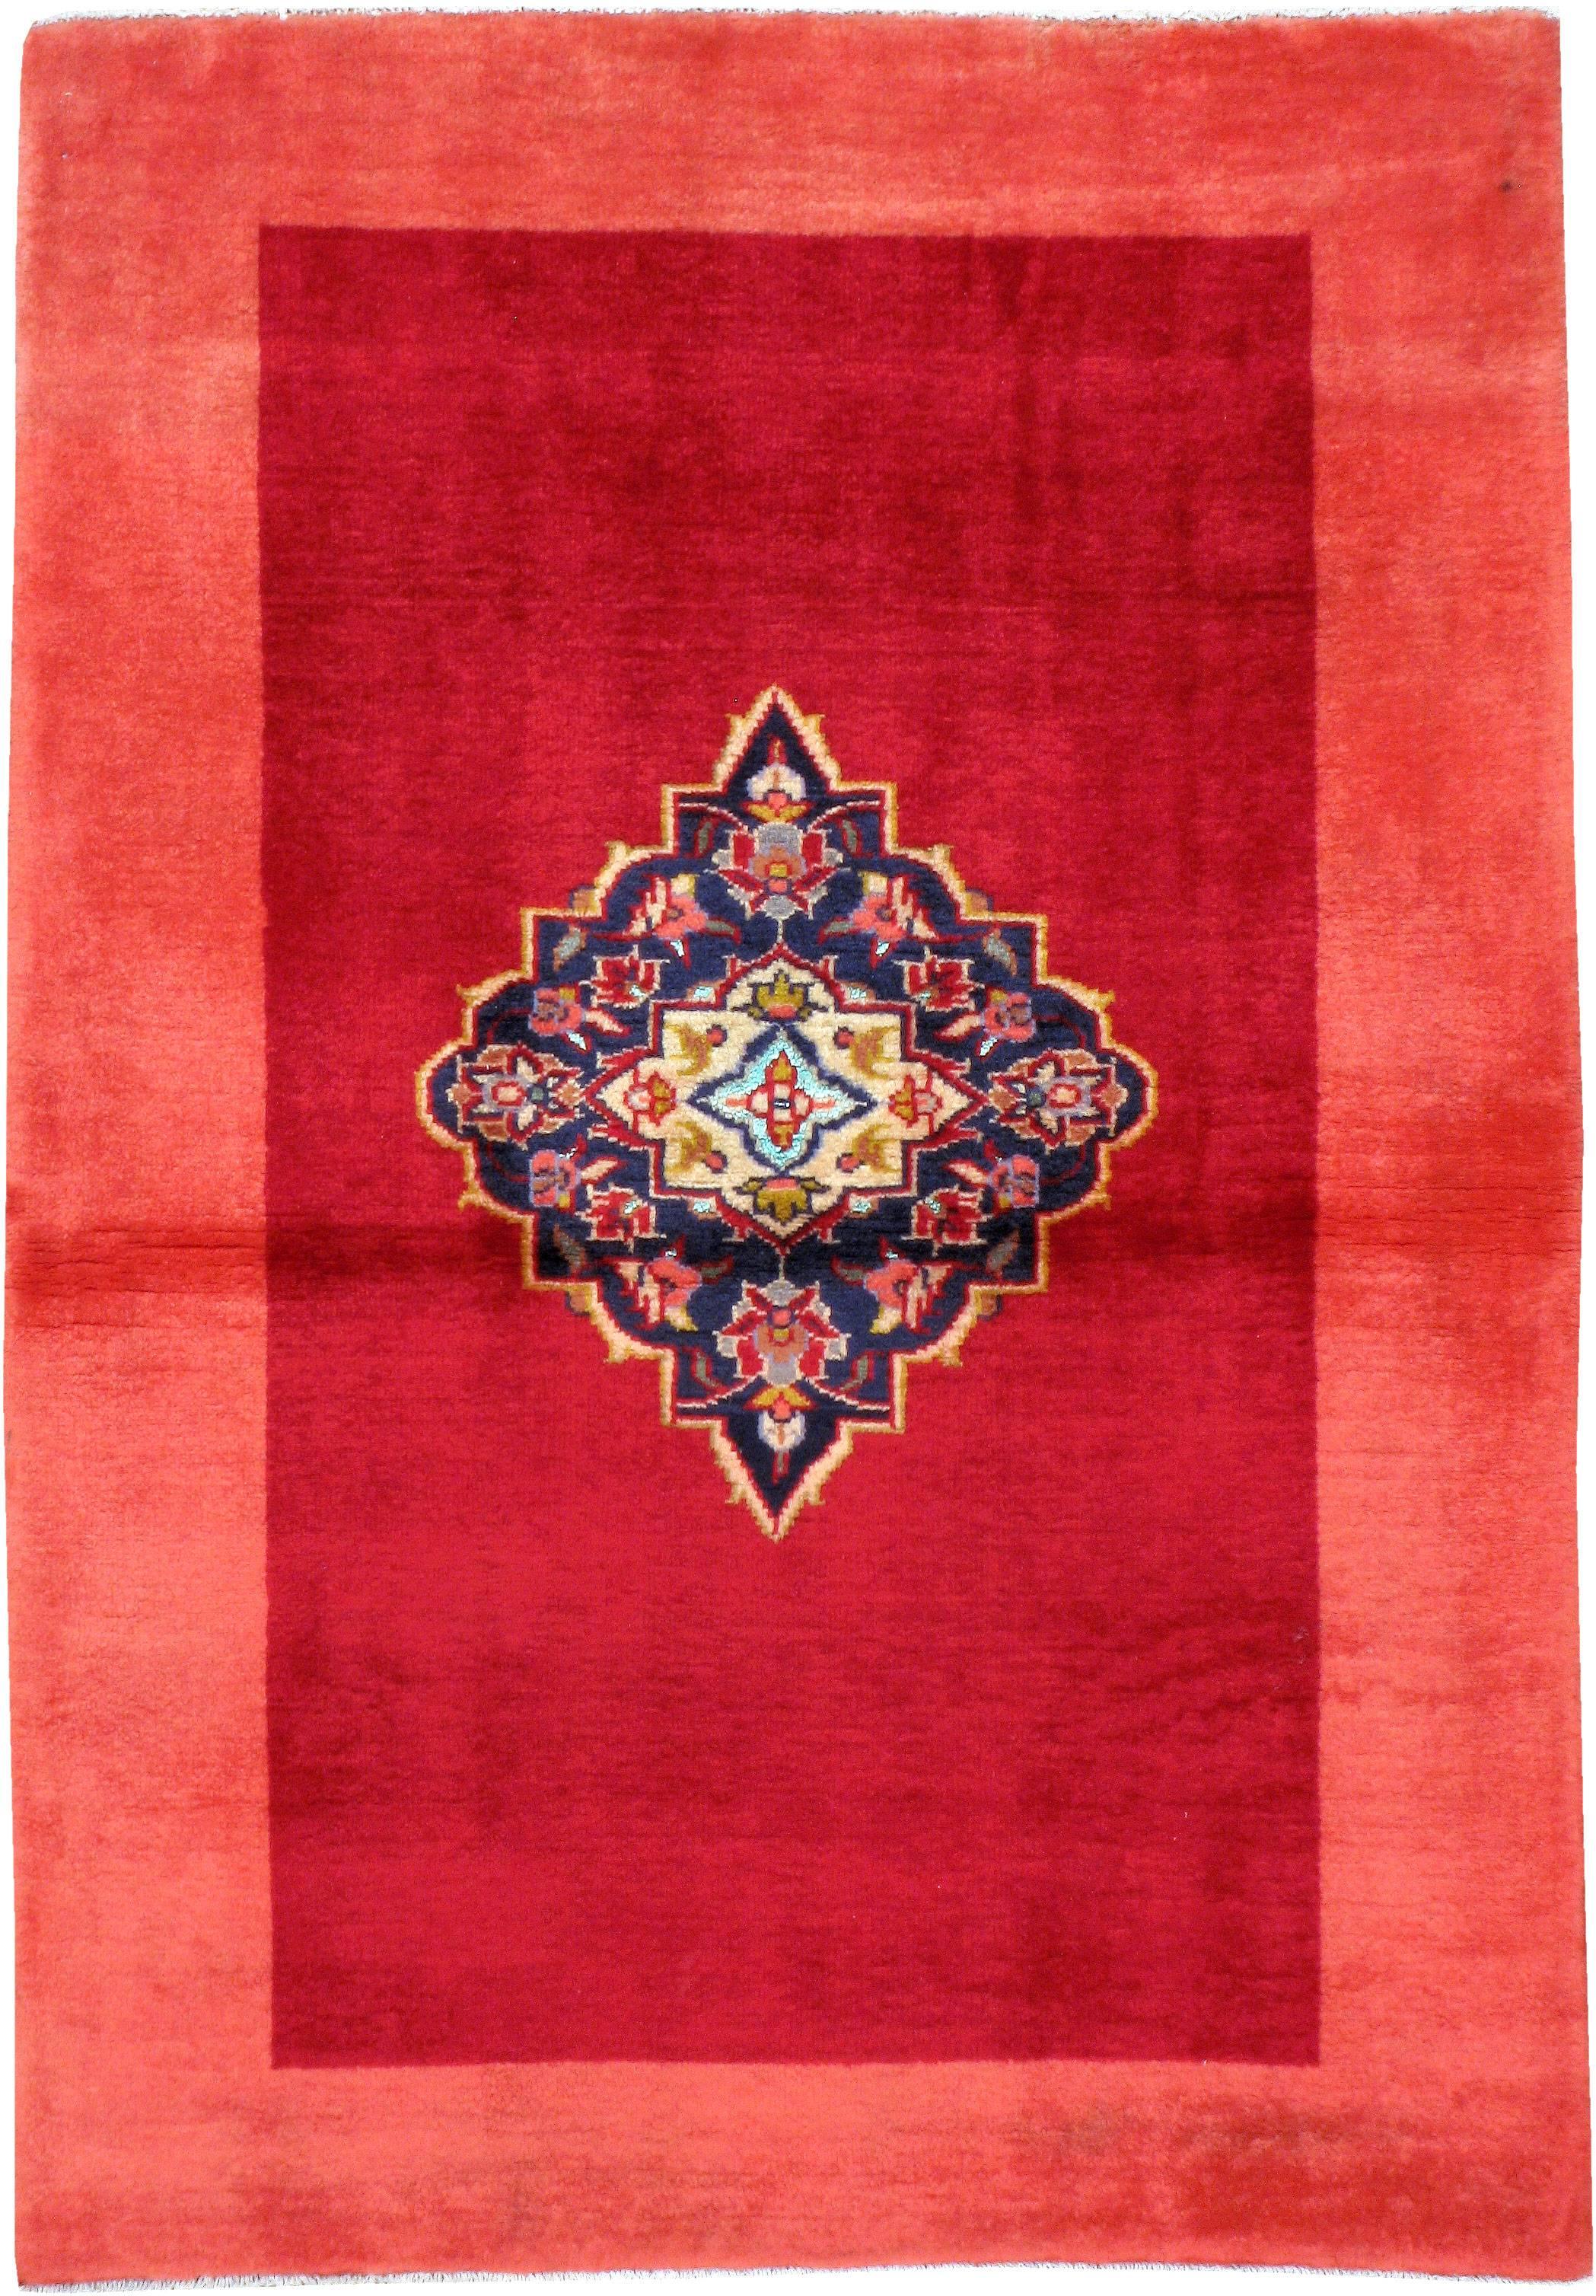 A vintage Persian Kashan carpet from the second quarter of the 20th century. A traditional navy blue Herati medallion serves as the focal point and contrasts over a monochromatic modern style madder red field and border.